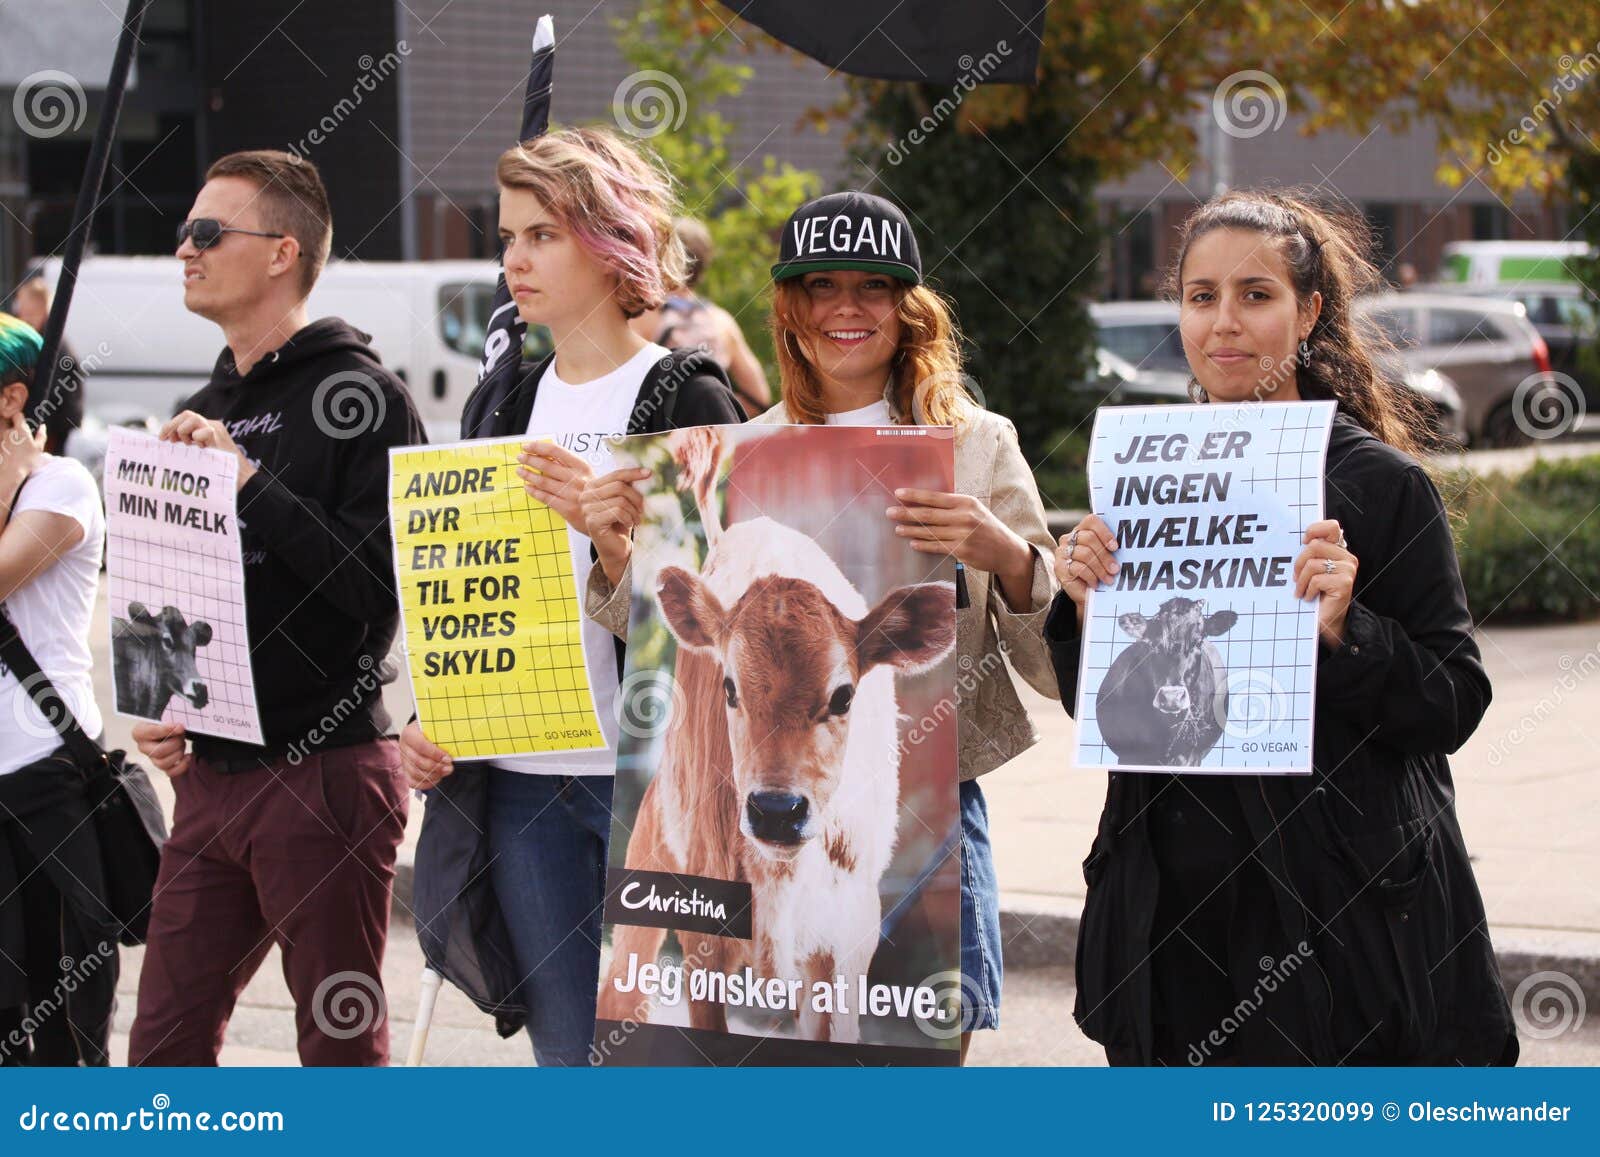 Vegan and Vegetarians for Animal Liberation Protest at a Demonstration  Against Cruelty Towards Animals and Eating Meat and Dairy P Editorial Stock  Image - Image of hold, action: 125320099